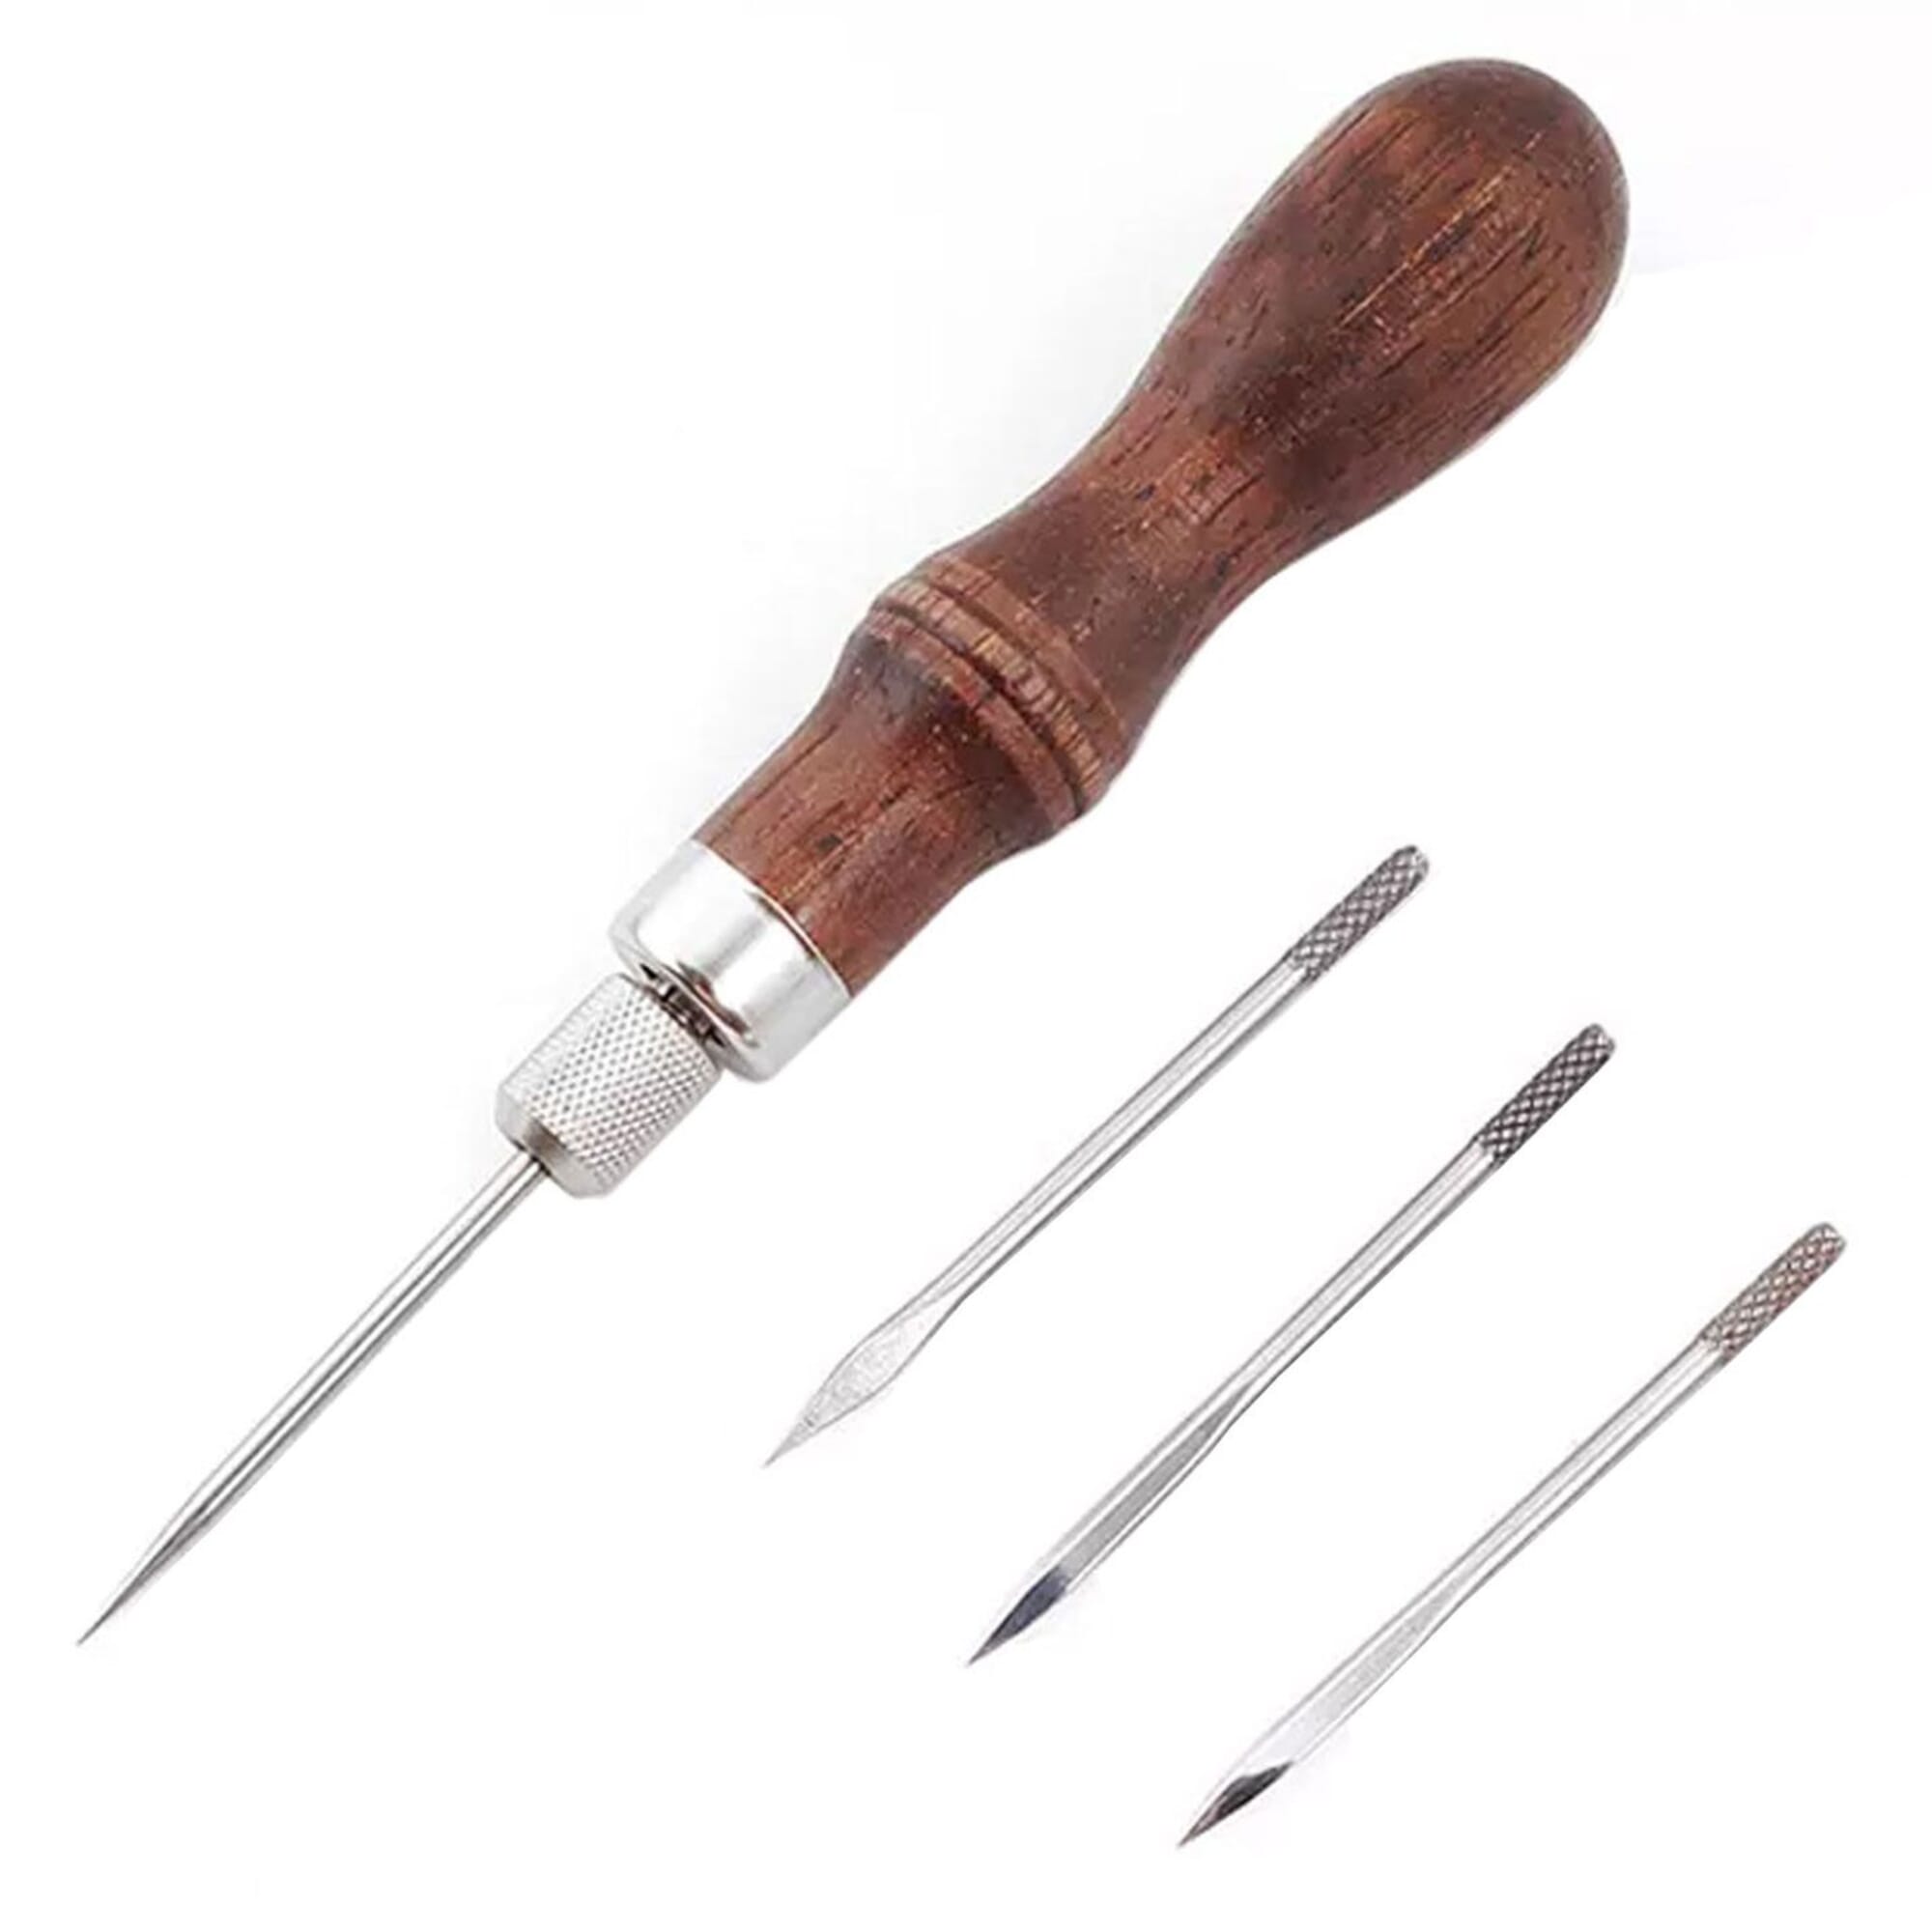 Professional Leathercraft Accessories, Sewing, Stitching Awl Tool Kit & Supplies